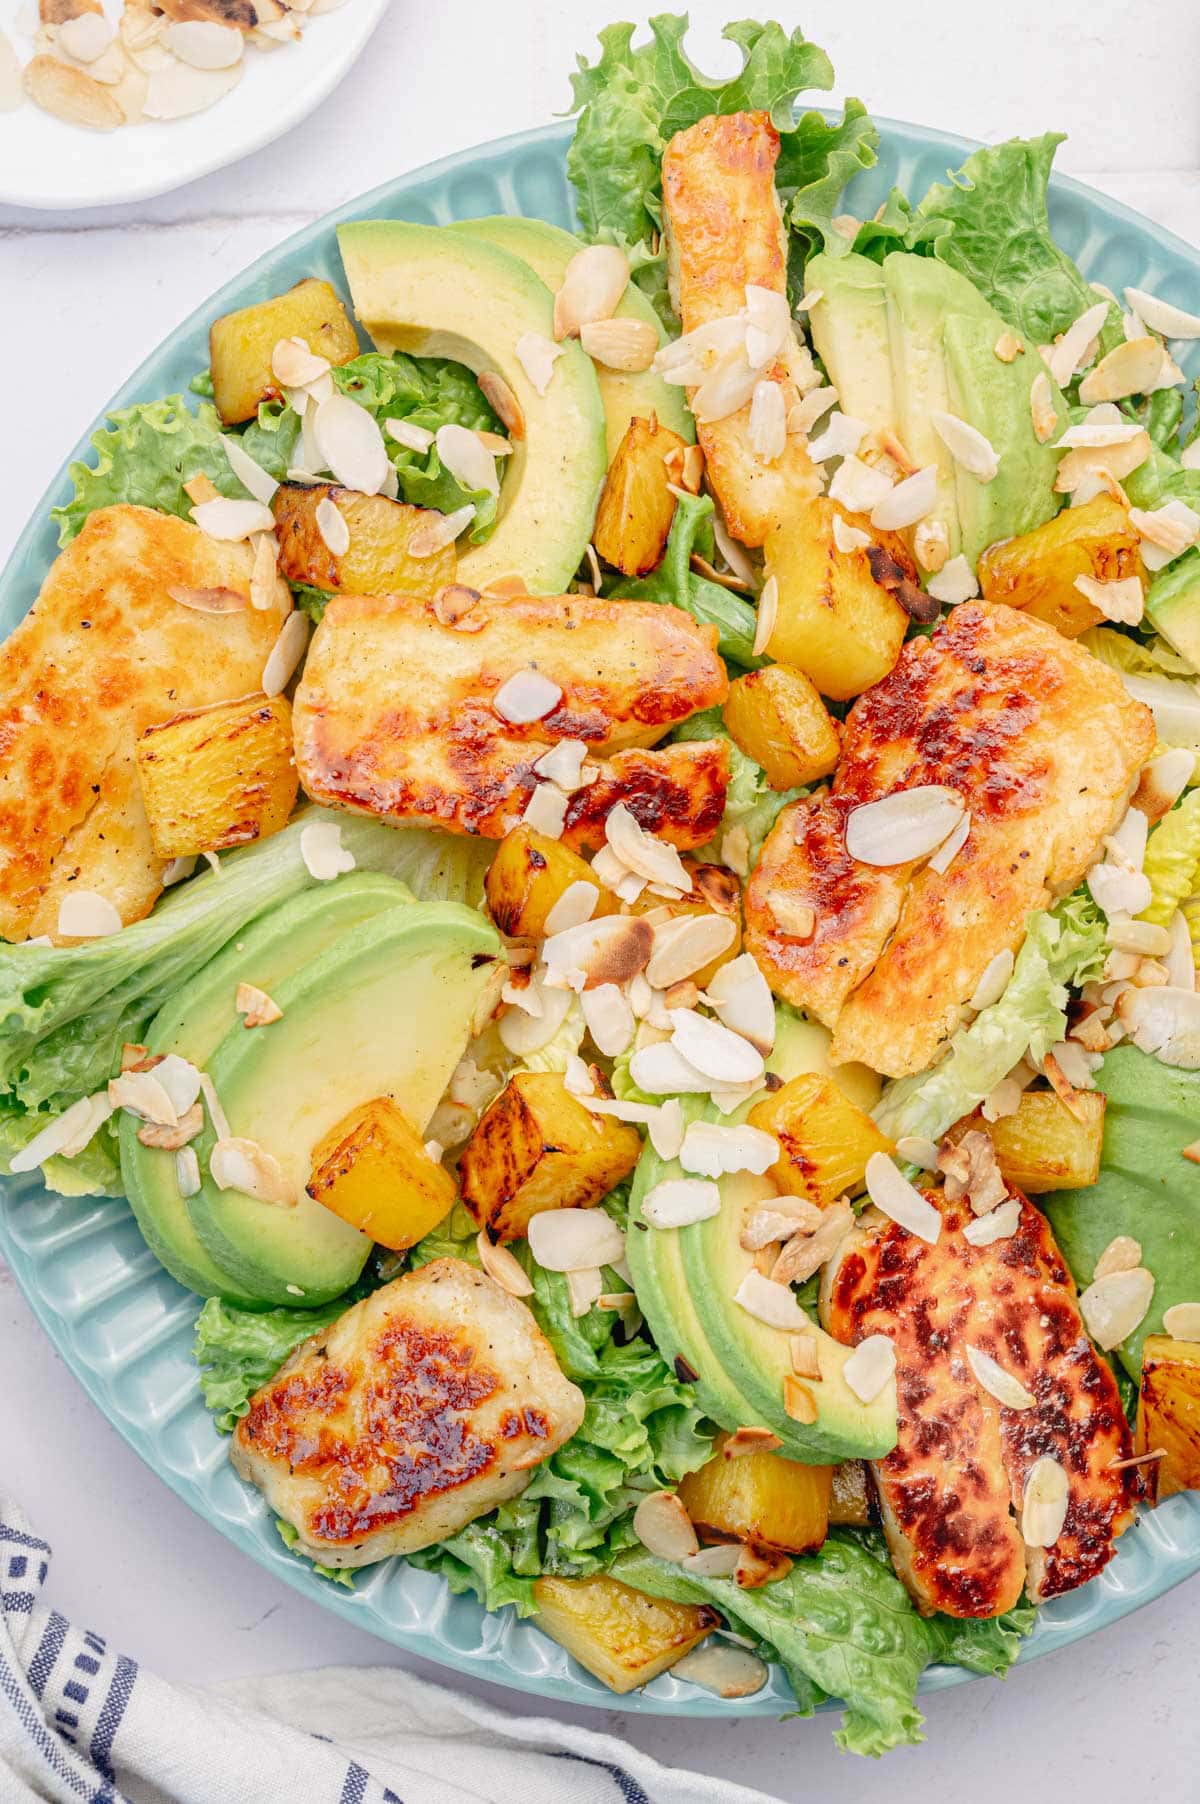 Halloumi Salad with pineapple and avocado on a blue plate.